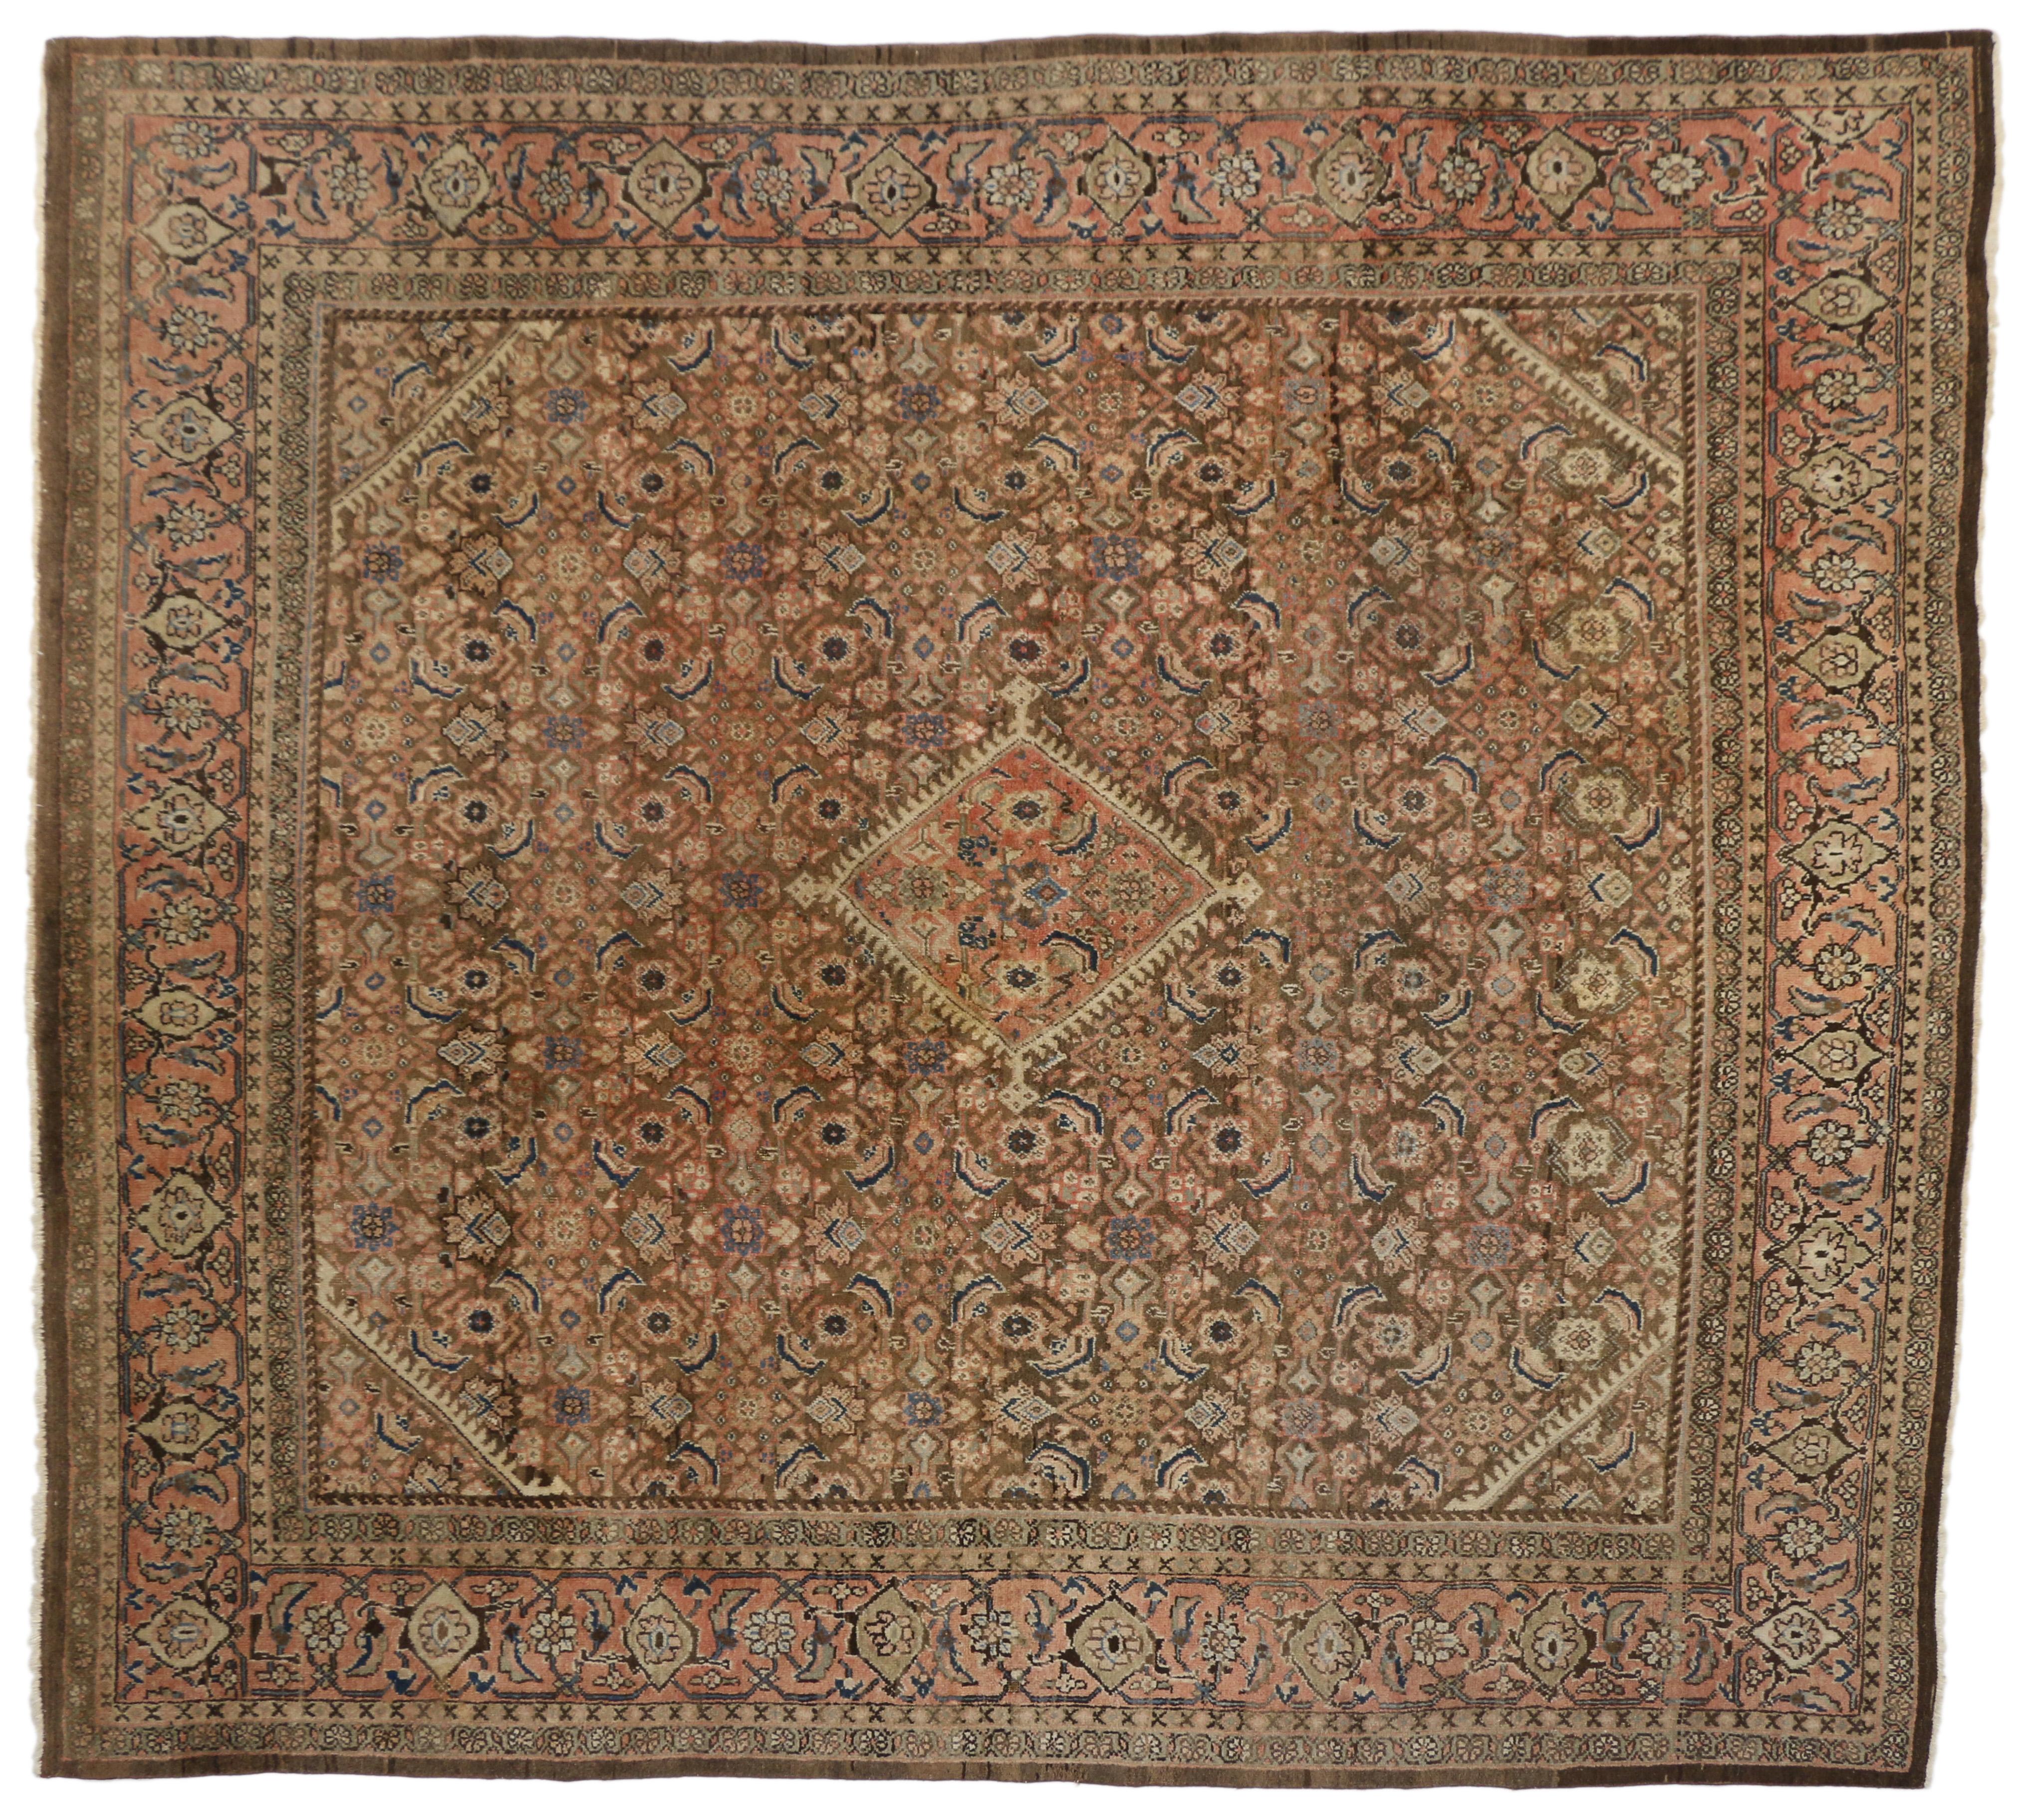 20th Century Vintage Persian Mahal Rug with English Country Cottage Style